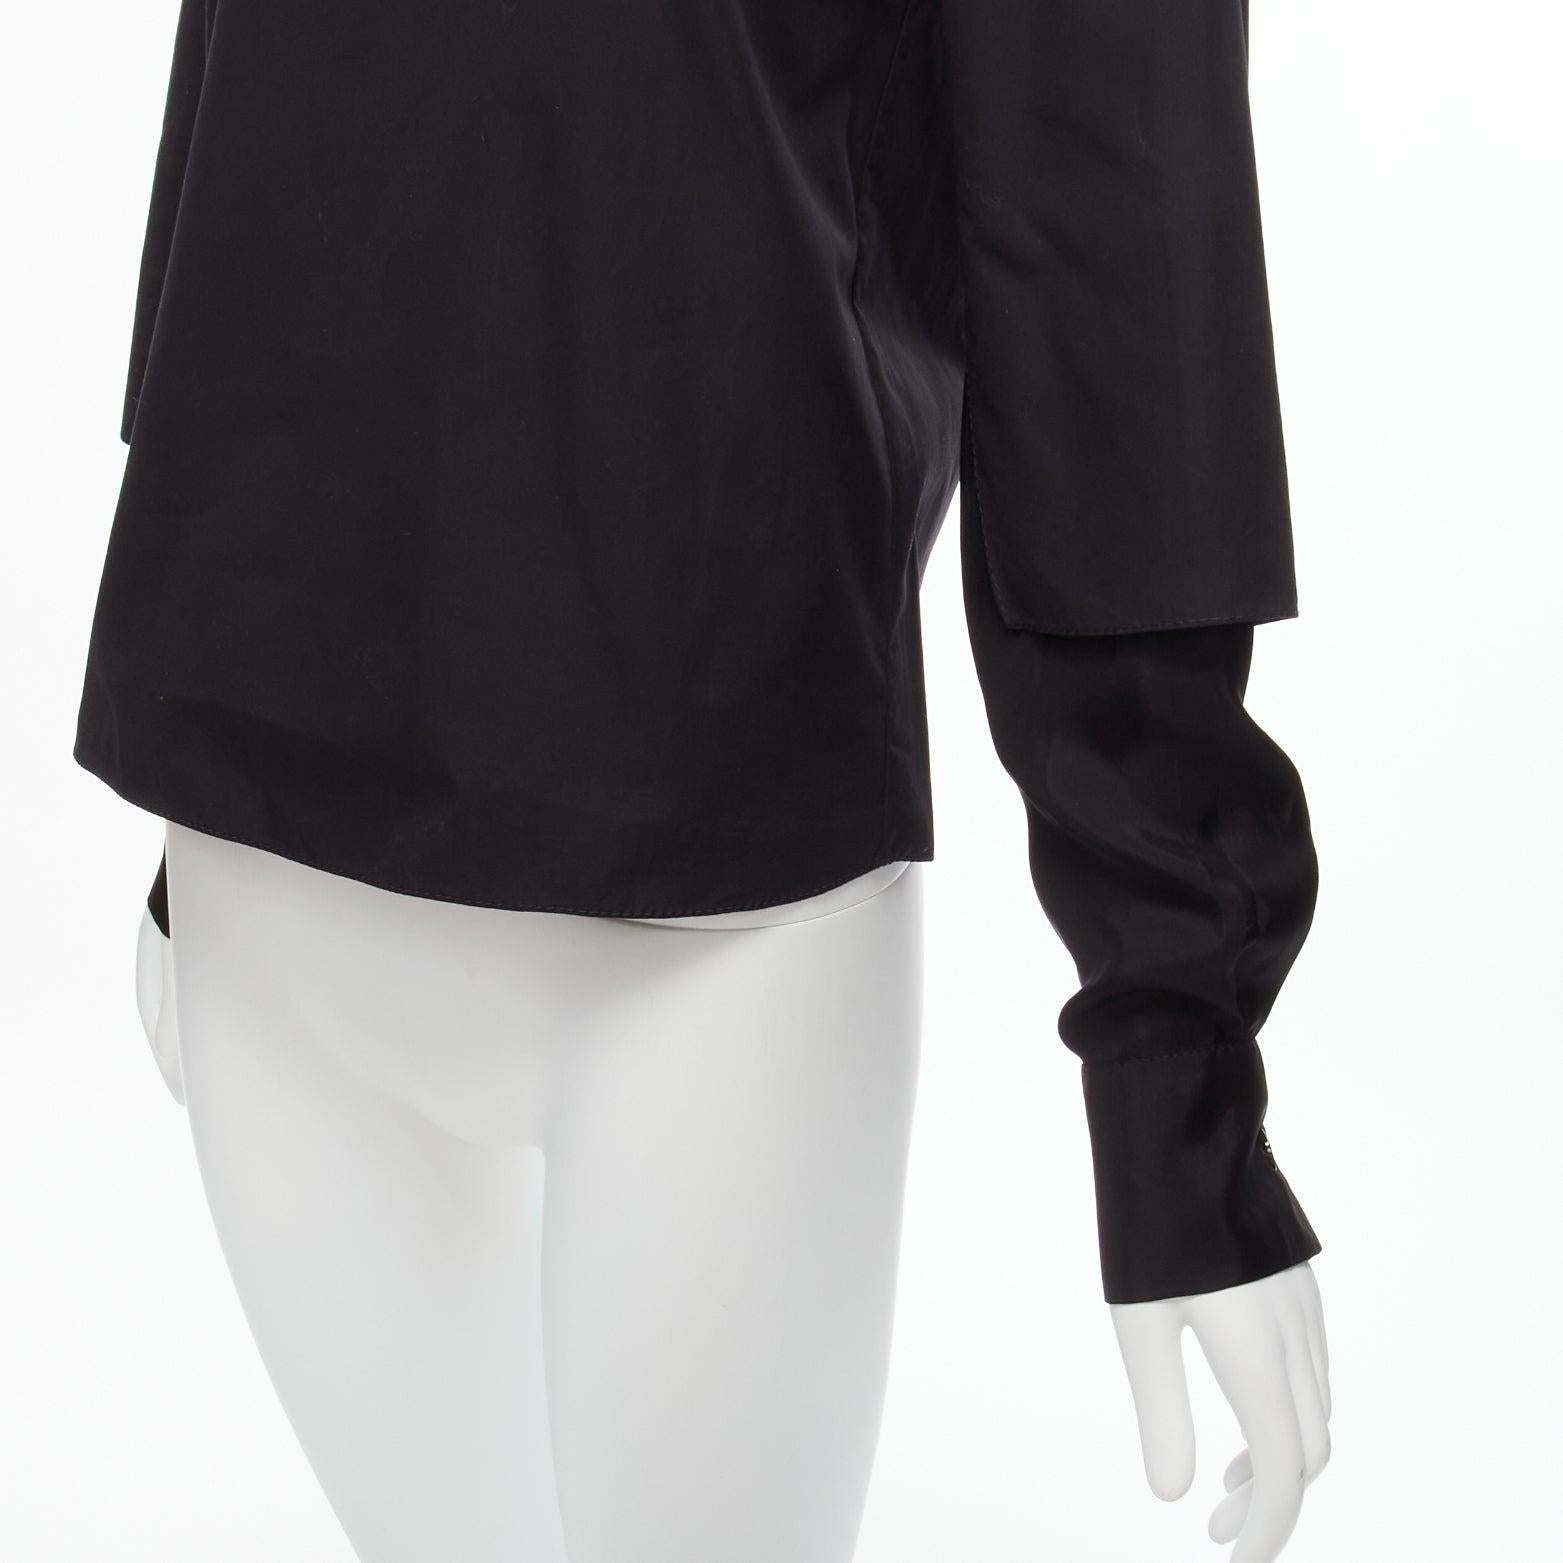 new MARNI black cotton layered sleeves minimal crew neck blouse top FR36 S
Reference: SNKO/A00227
Brand: Marni
Material: Cotton
Color: Black
Pattern: Solid
Closure: Zip
Lining: Black Fabric
Extra Details: Back zip. Layered cuffs with different